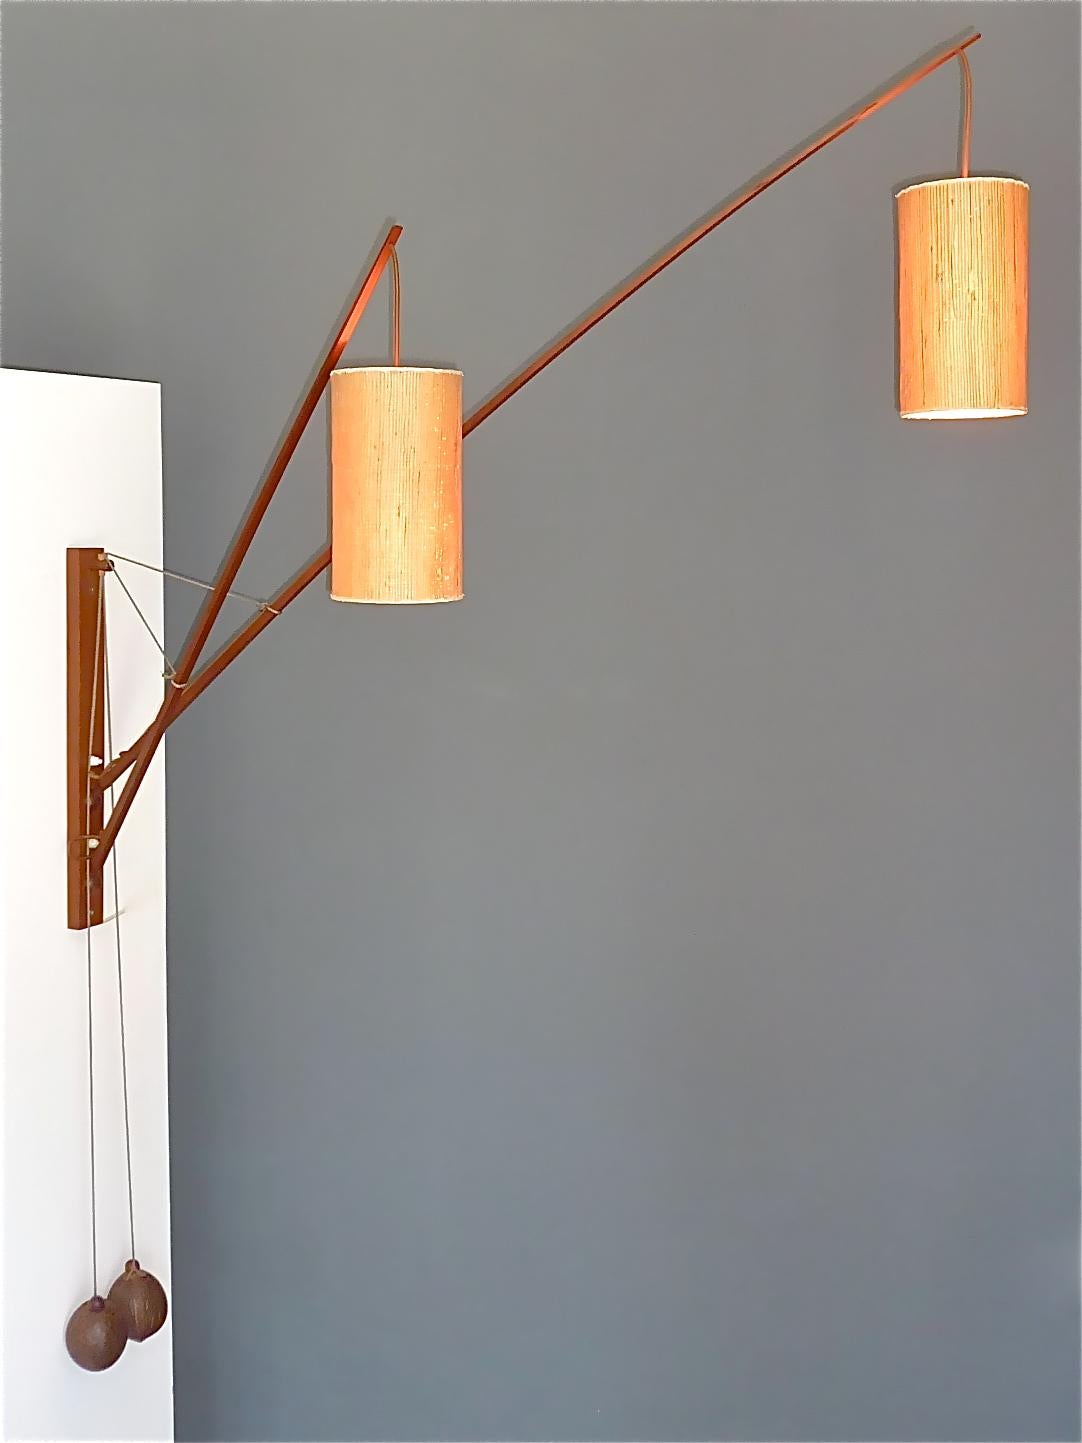 Mid-20th Century Monumental Teak Wall Lights Lamp by Rupprecht Skrip Coconut Counterweights 1950s For Sale